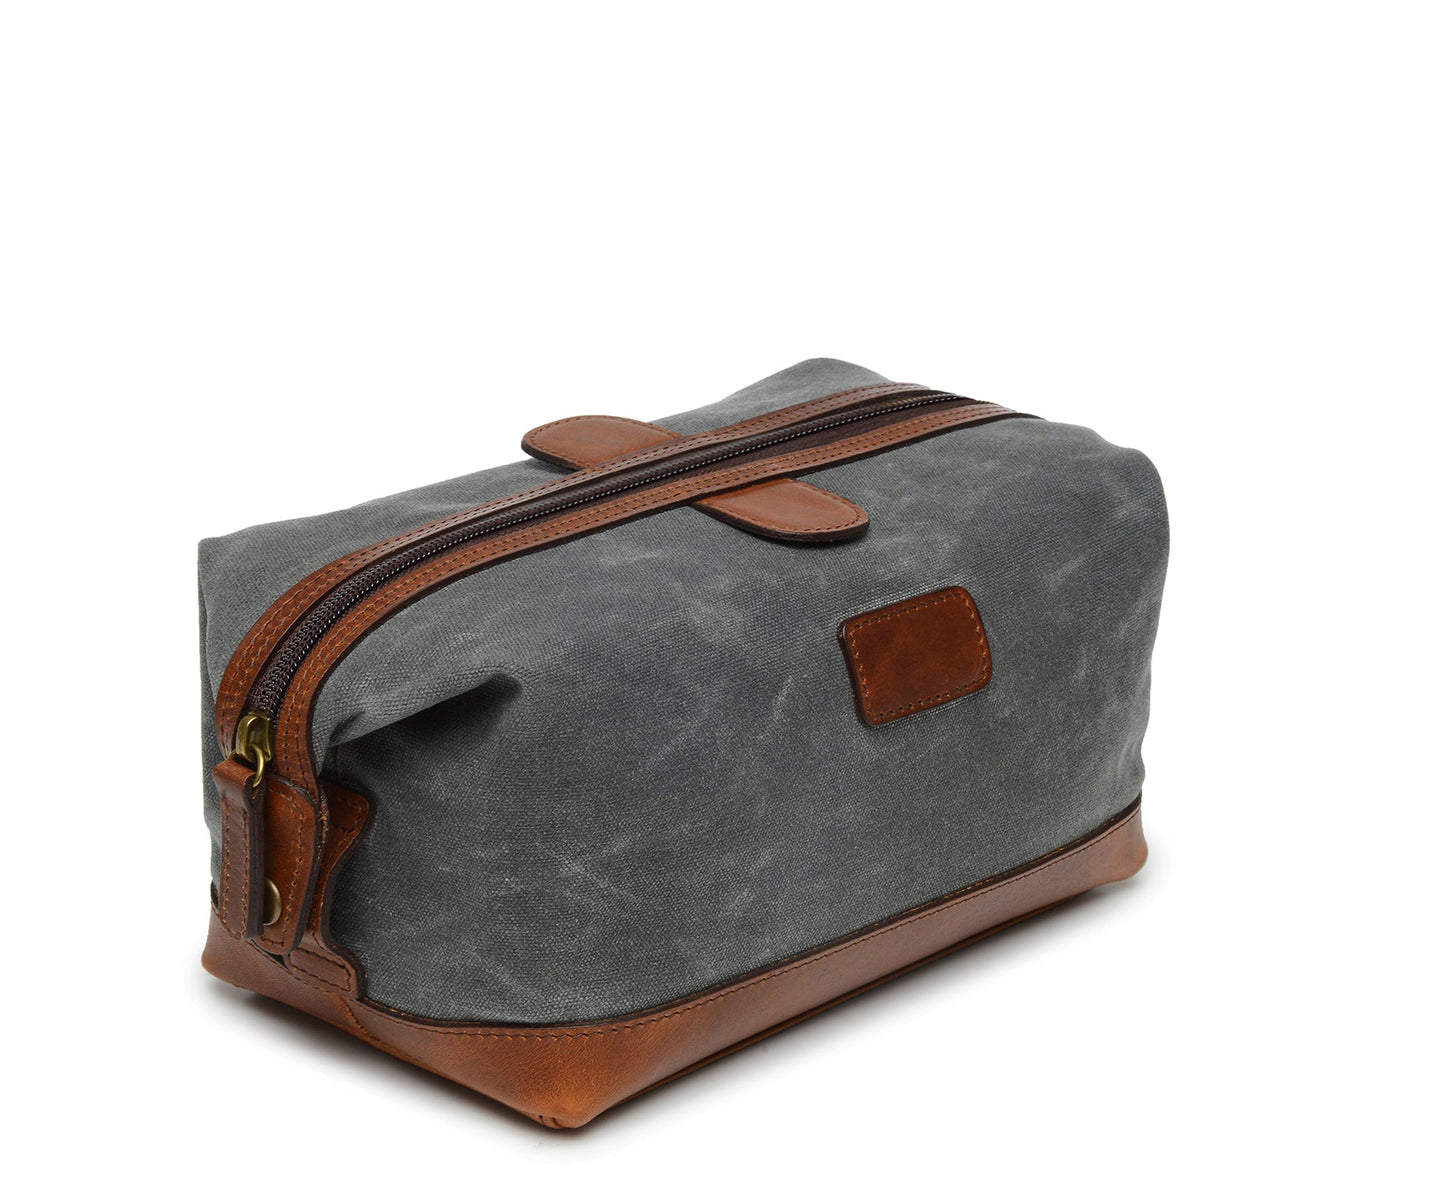 Ryder  | Waxed Cotton Canvas Dopp Kit | Zipper Toilet Kit | Travel Bag with Leather Trim | Made in America | Korchmar